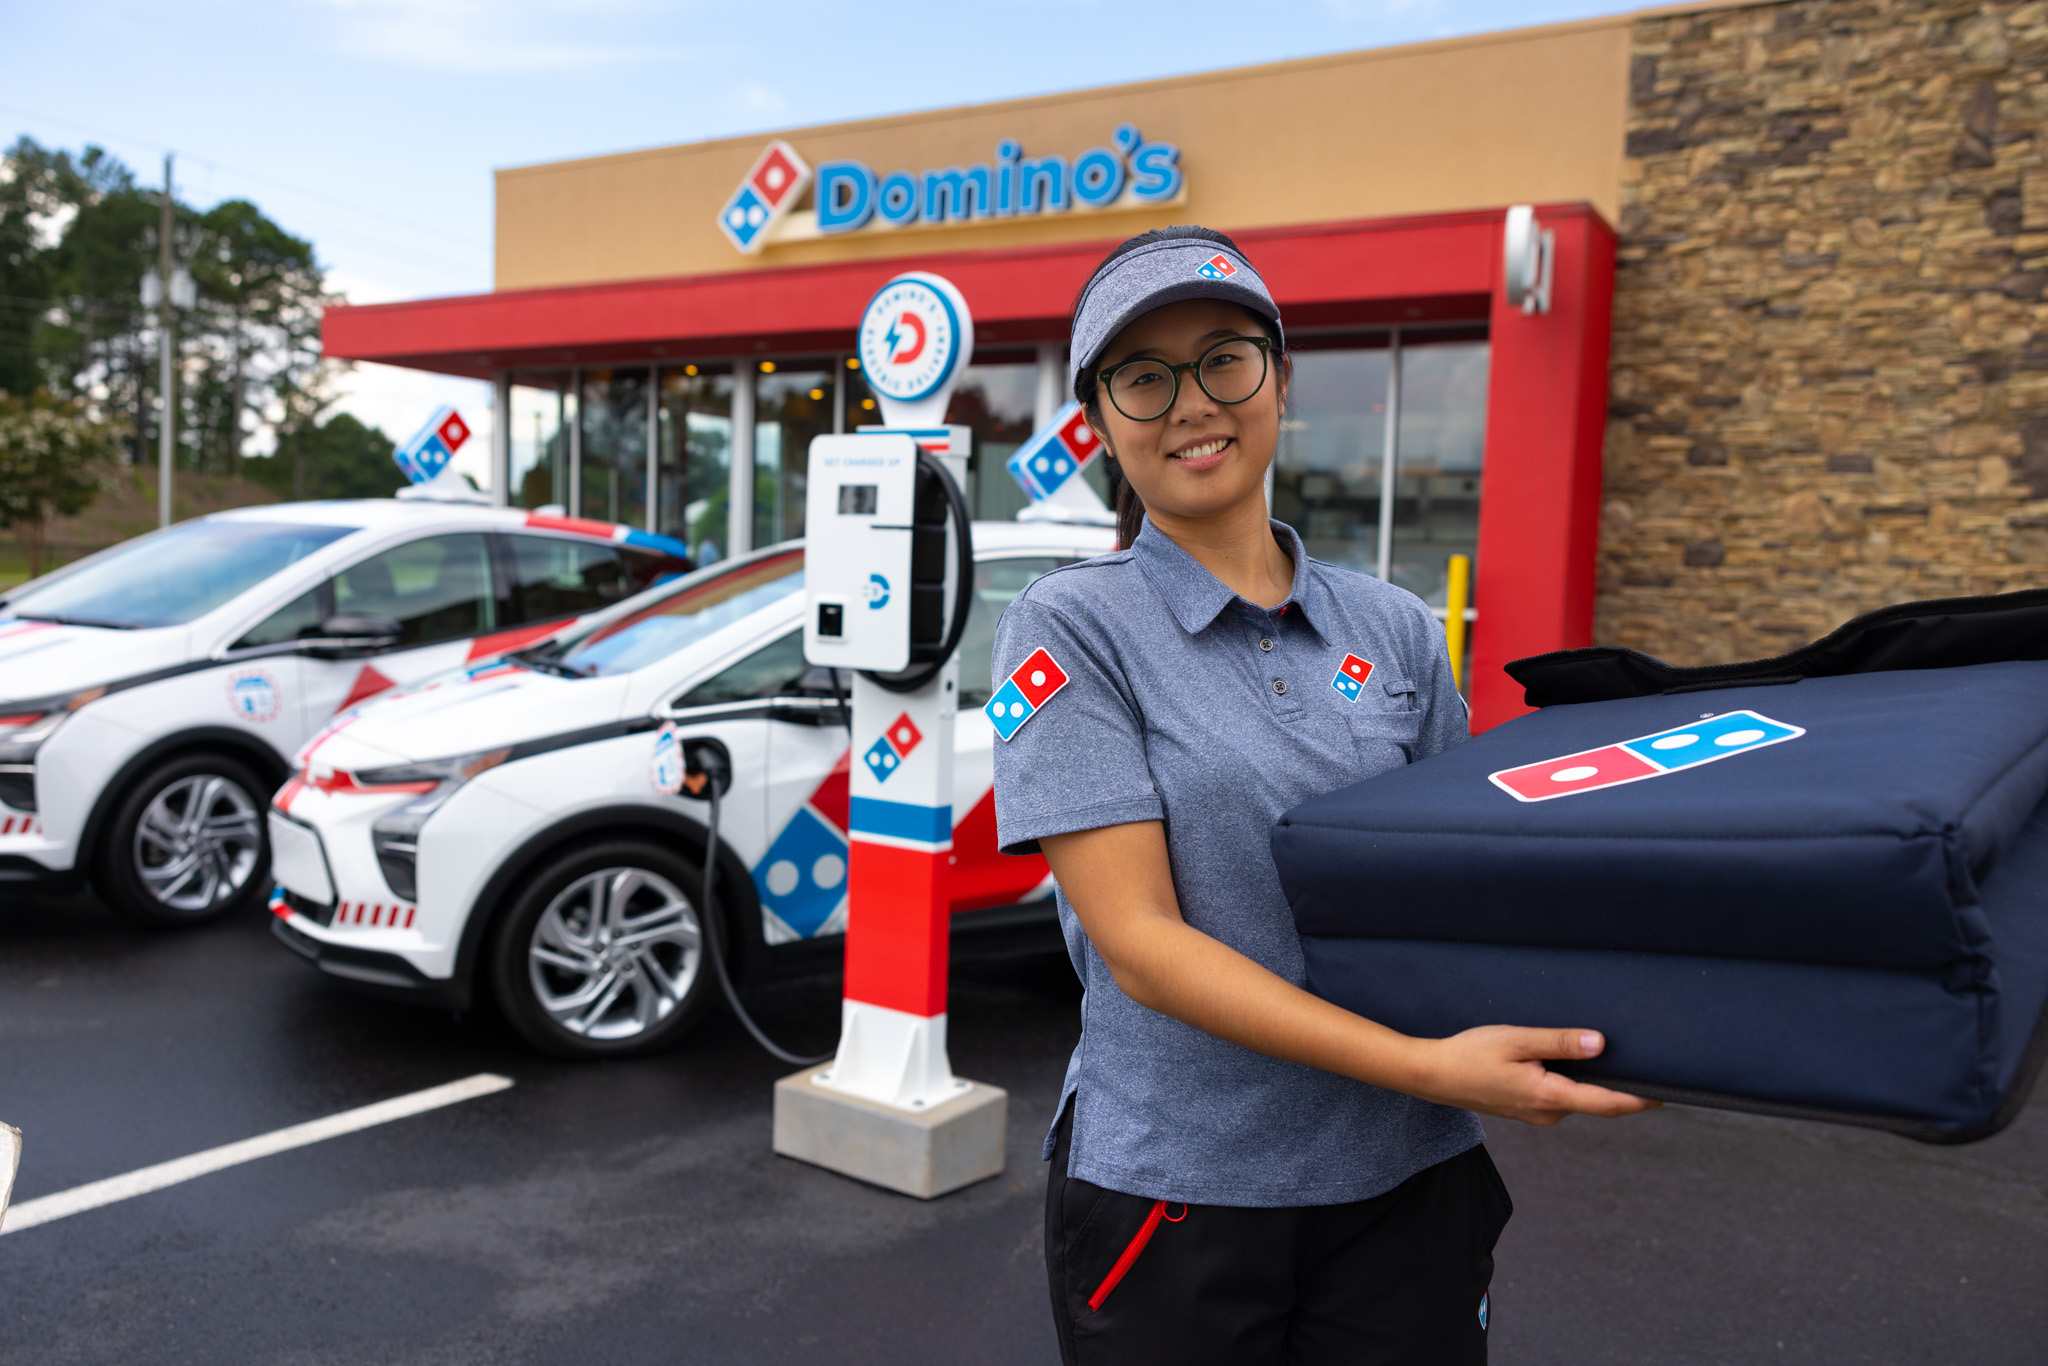 Domino's Pizza has purchased 800 Chevrolet Bolts for electric pizza delivery.